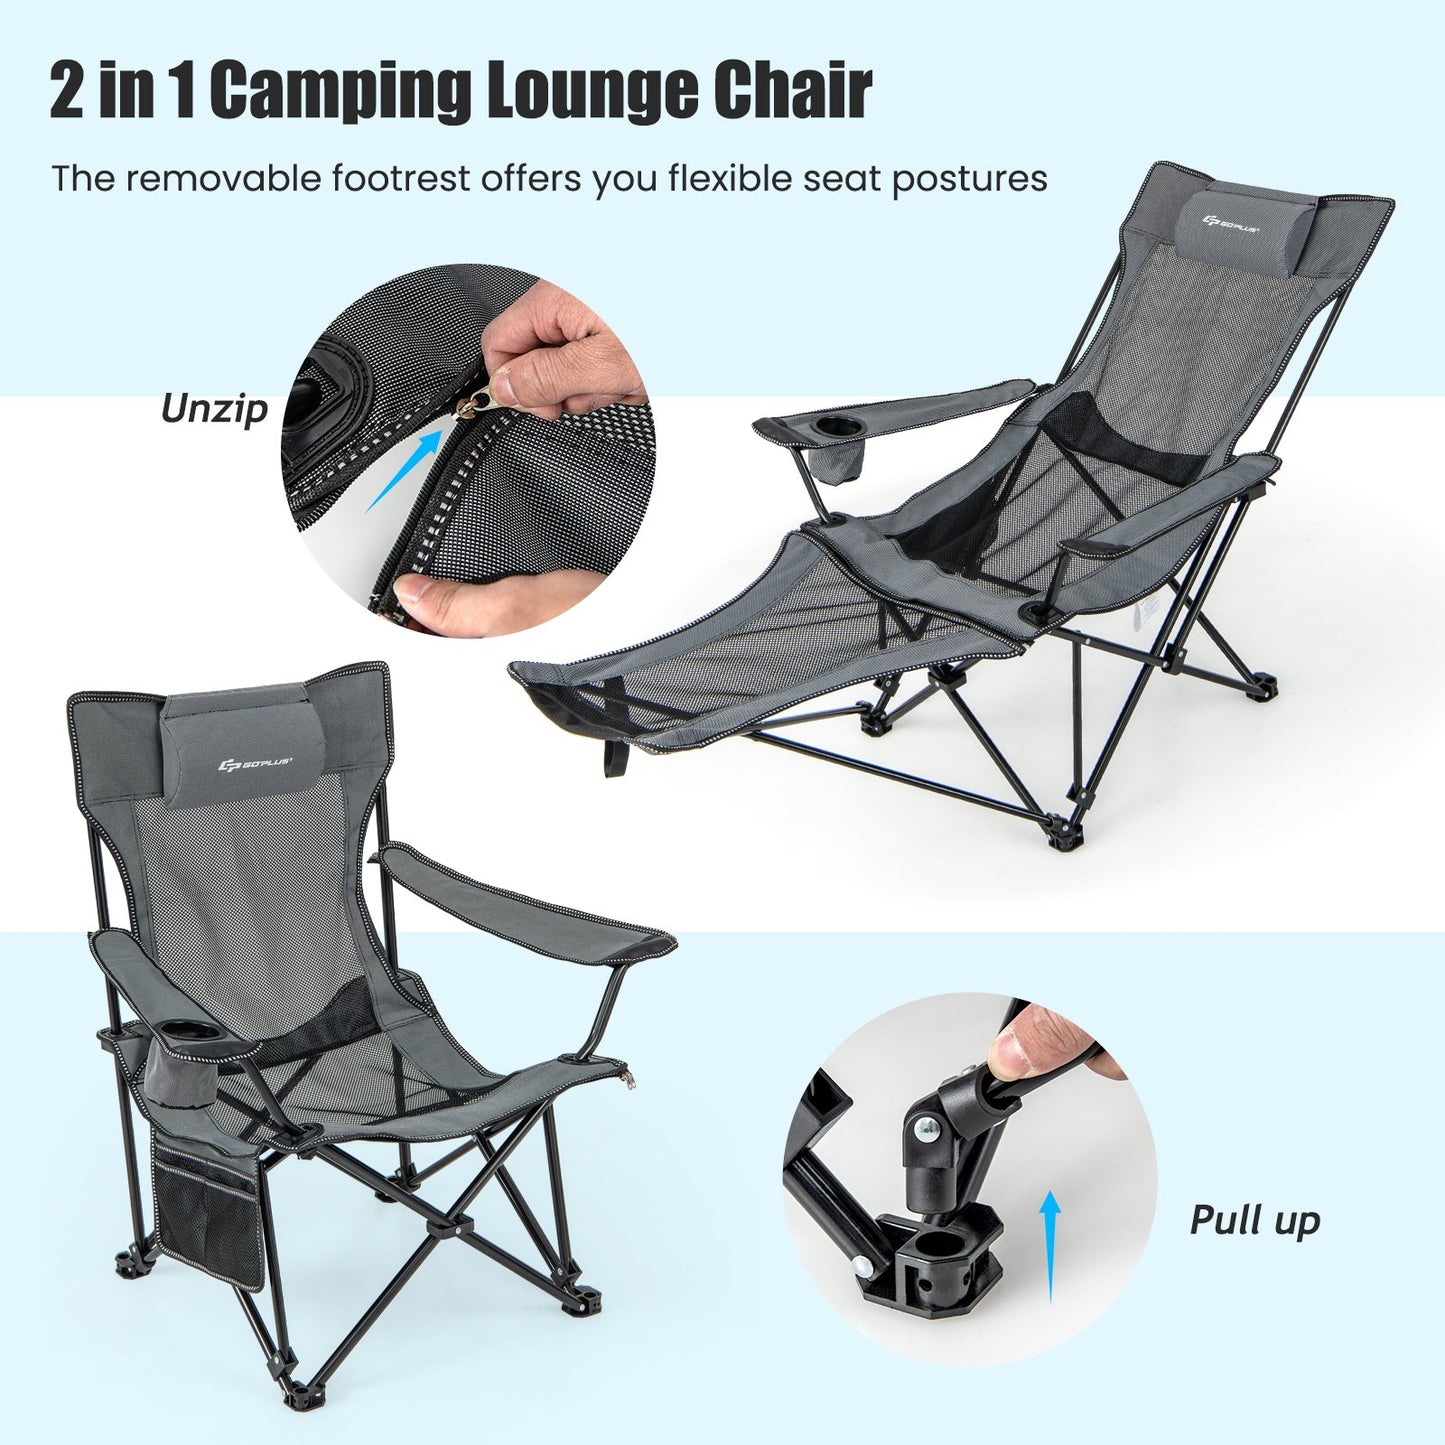 Camping Lounge Chair with Detachable Footrest Adjustable Backrest, Gray